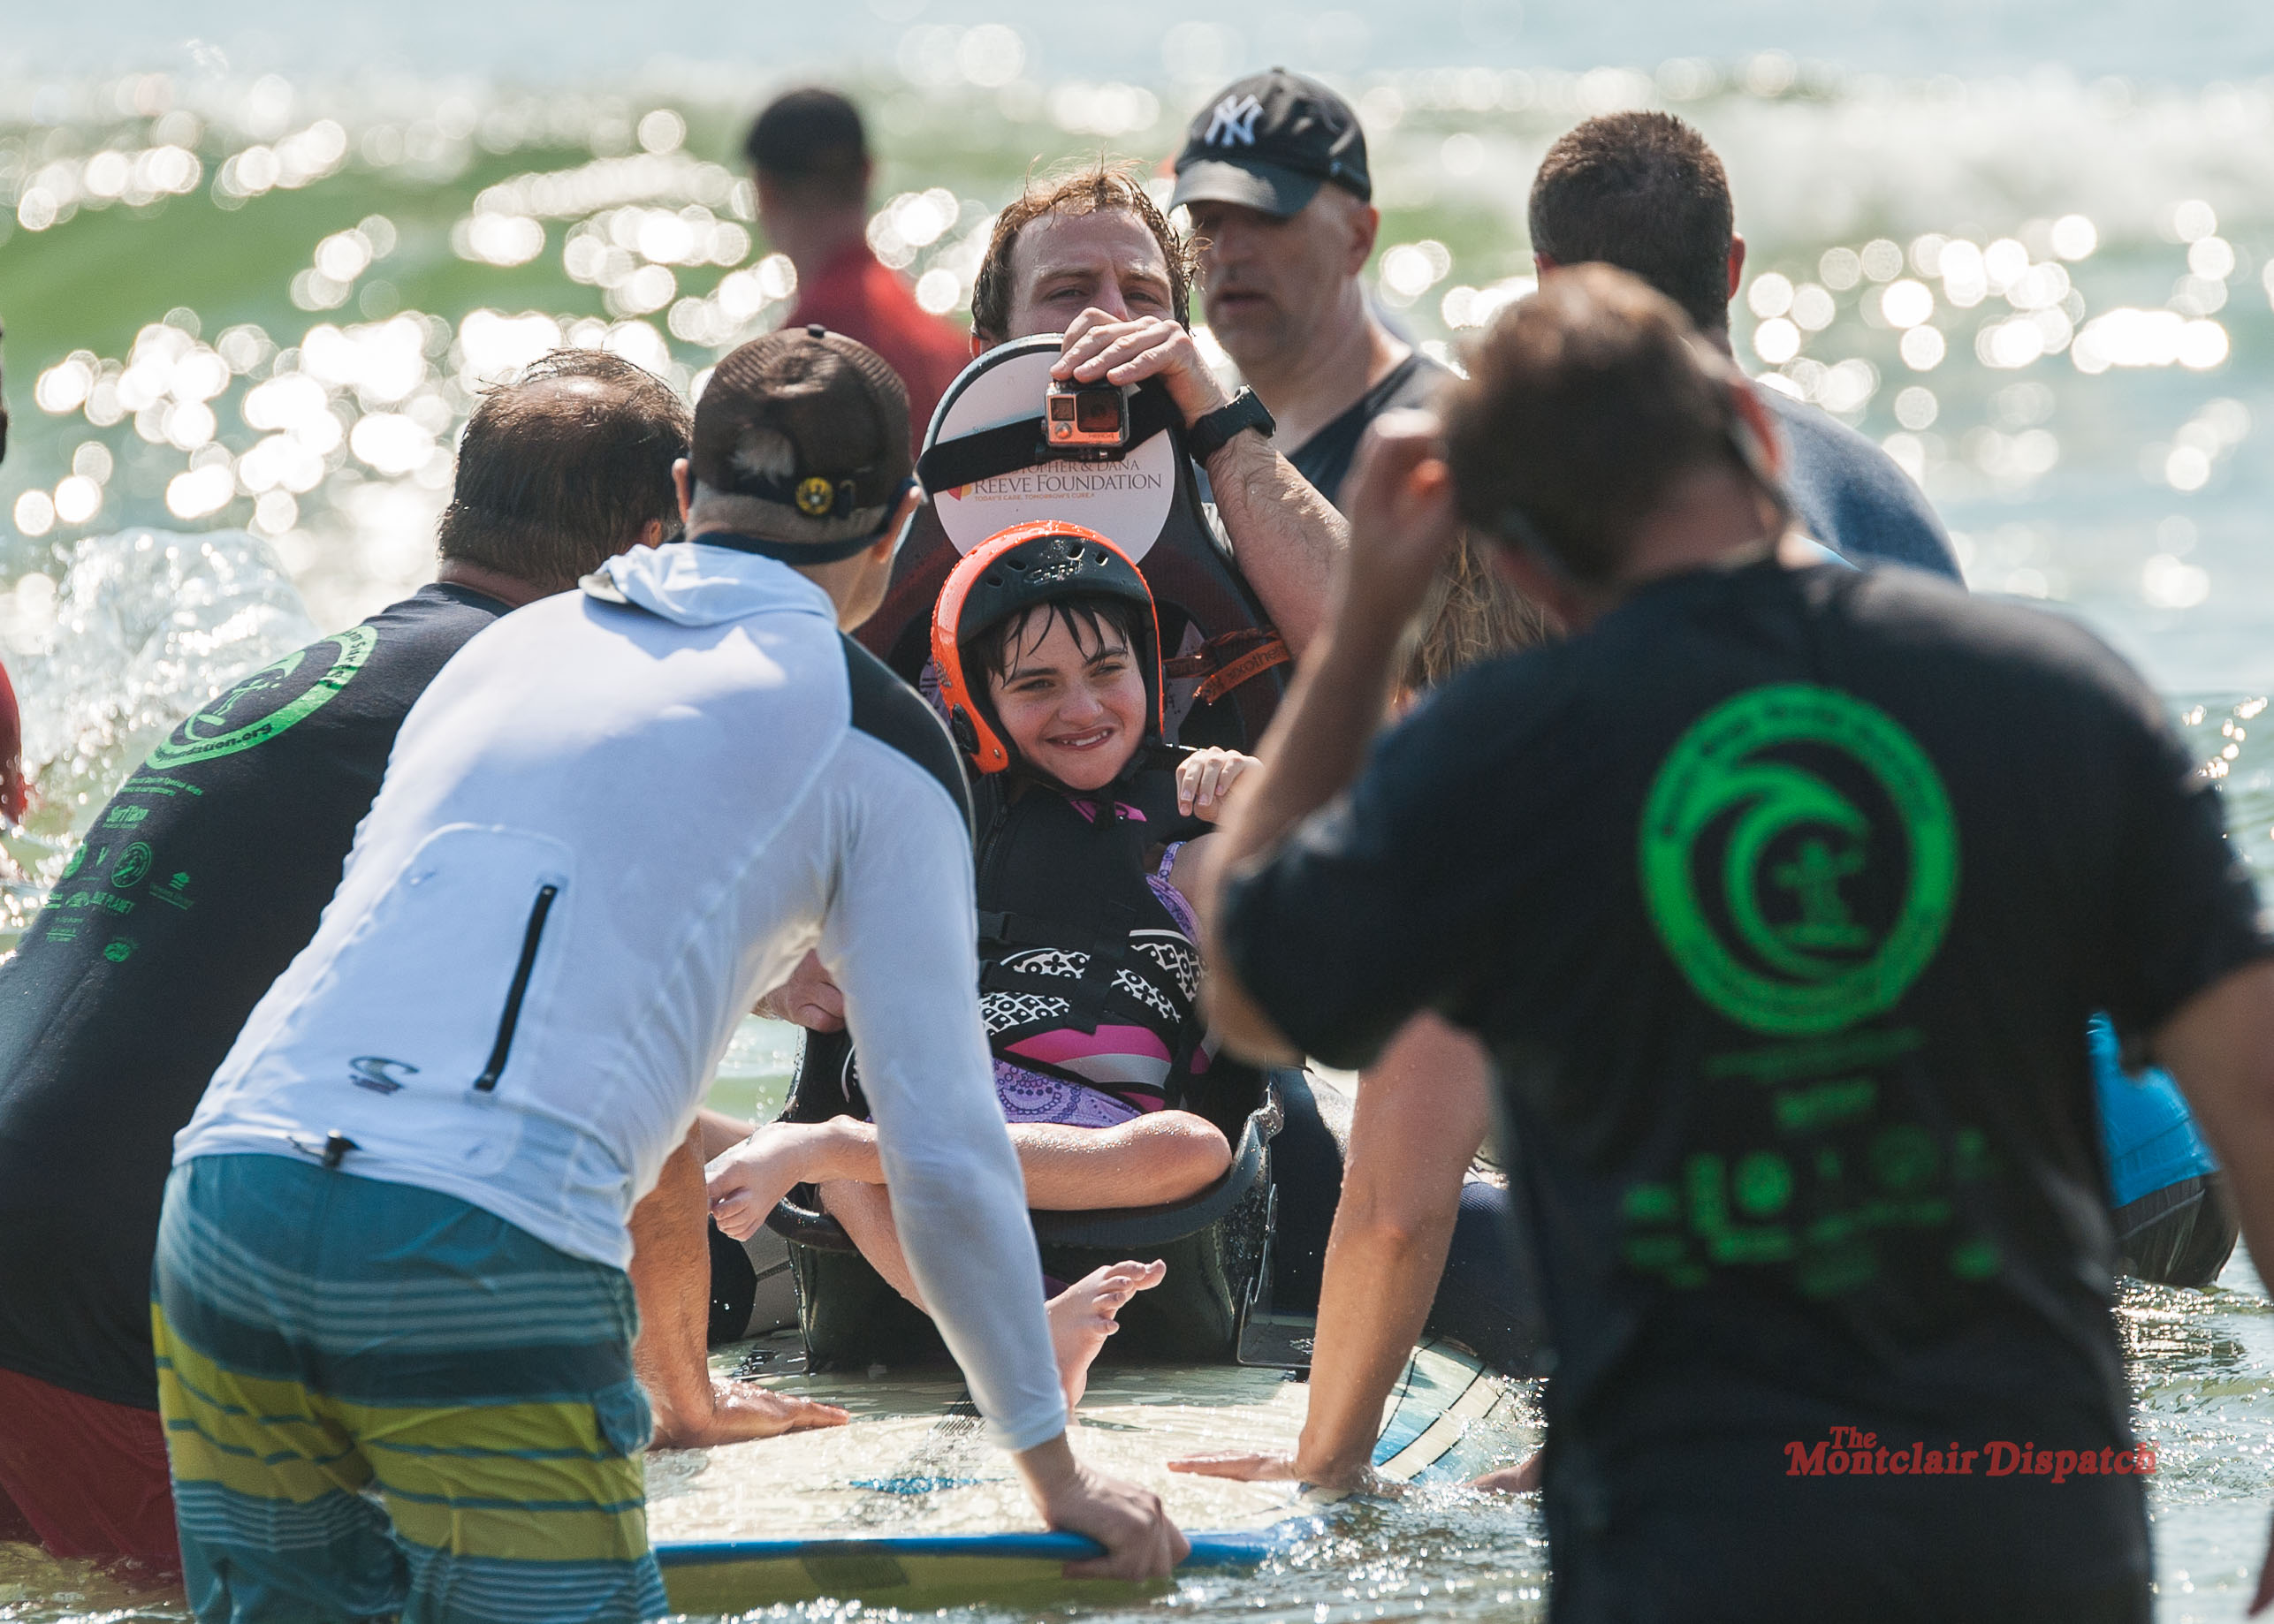 A participant happy after their turn surfing. Photo by Scott Kennedy for The Montclair Dispatch.